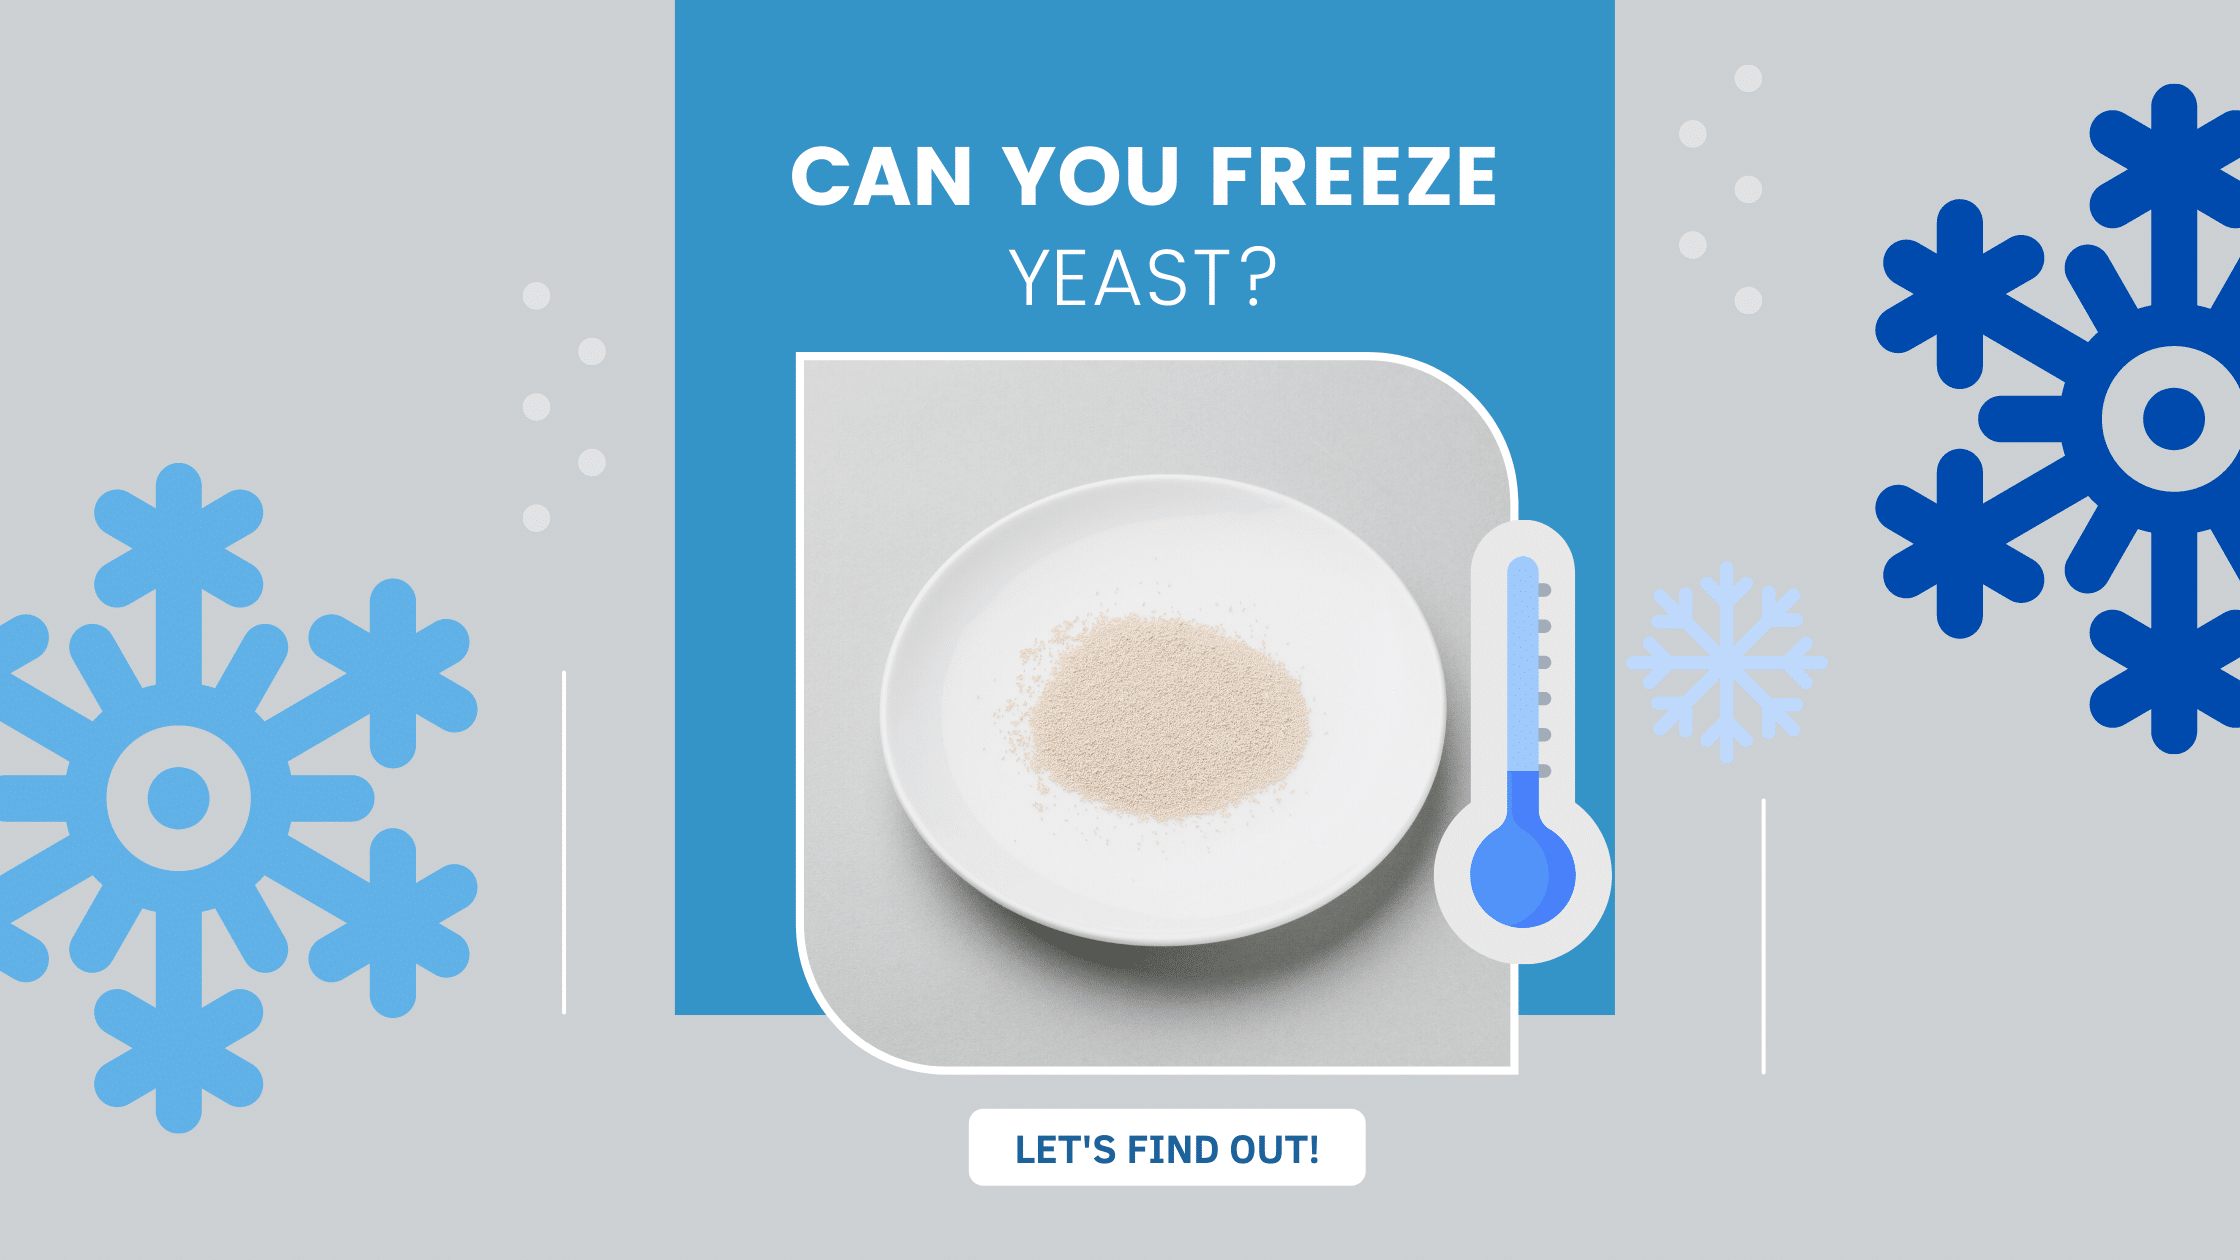 Can you freeze yeast